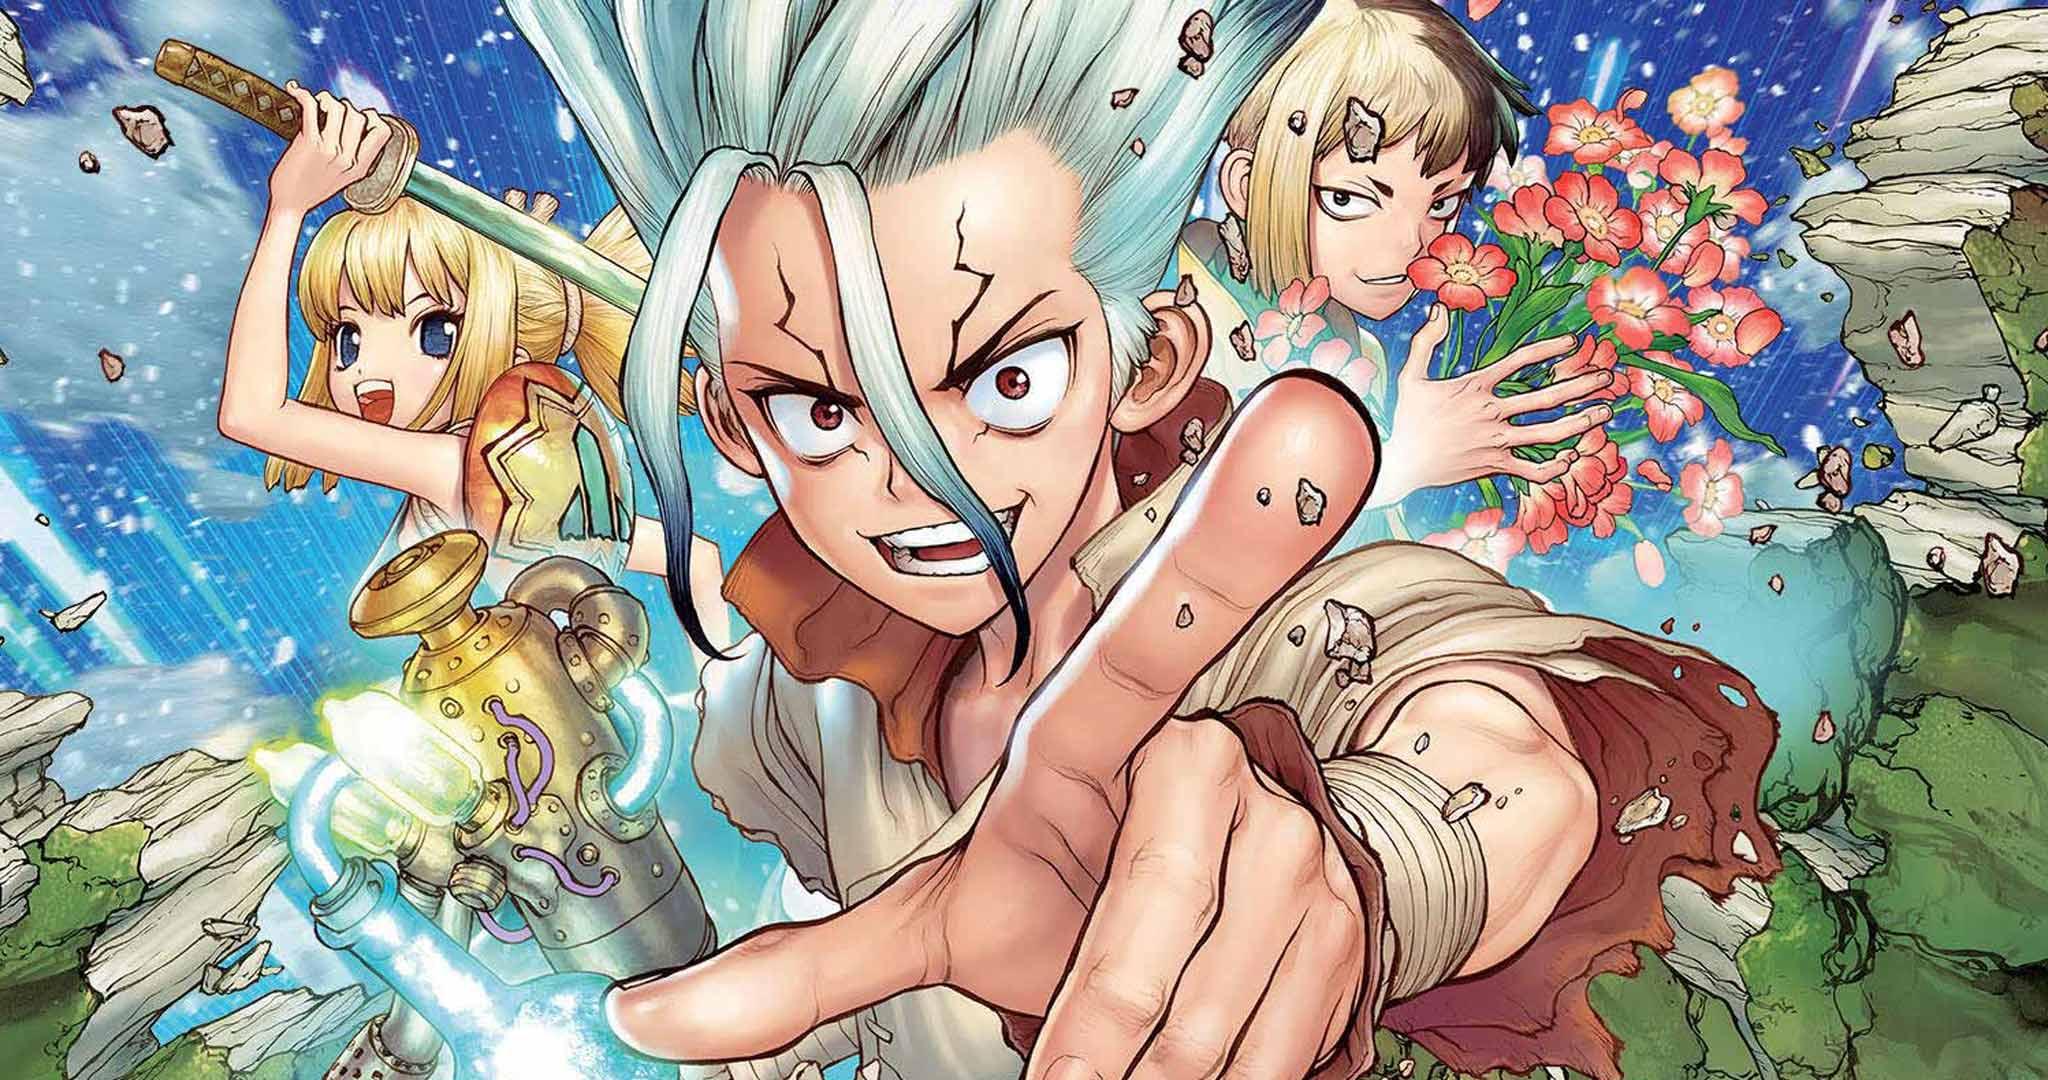 Dr Stone Wallpapers For Free, Dr. Stone, Anime